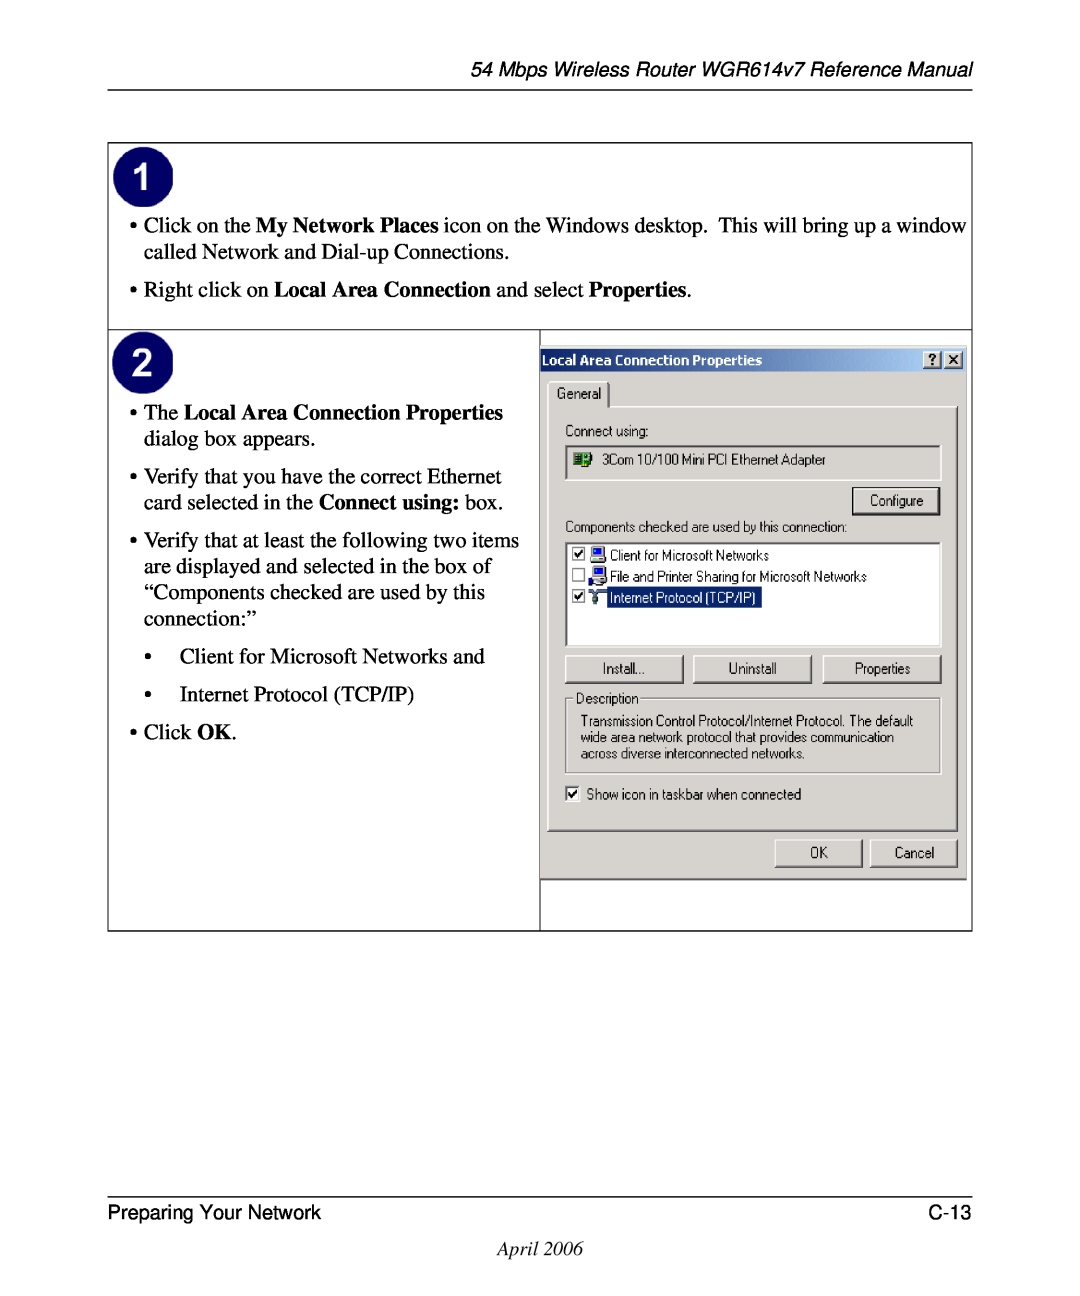 NETGEAR WGR614v7 manual Right click on Local Area Connection and select Properties 